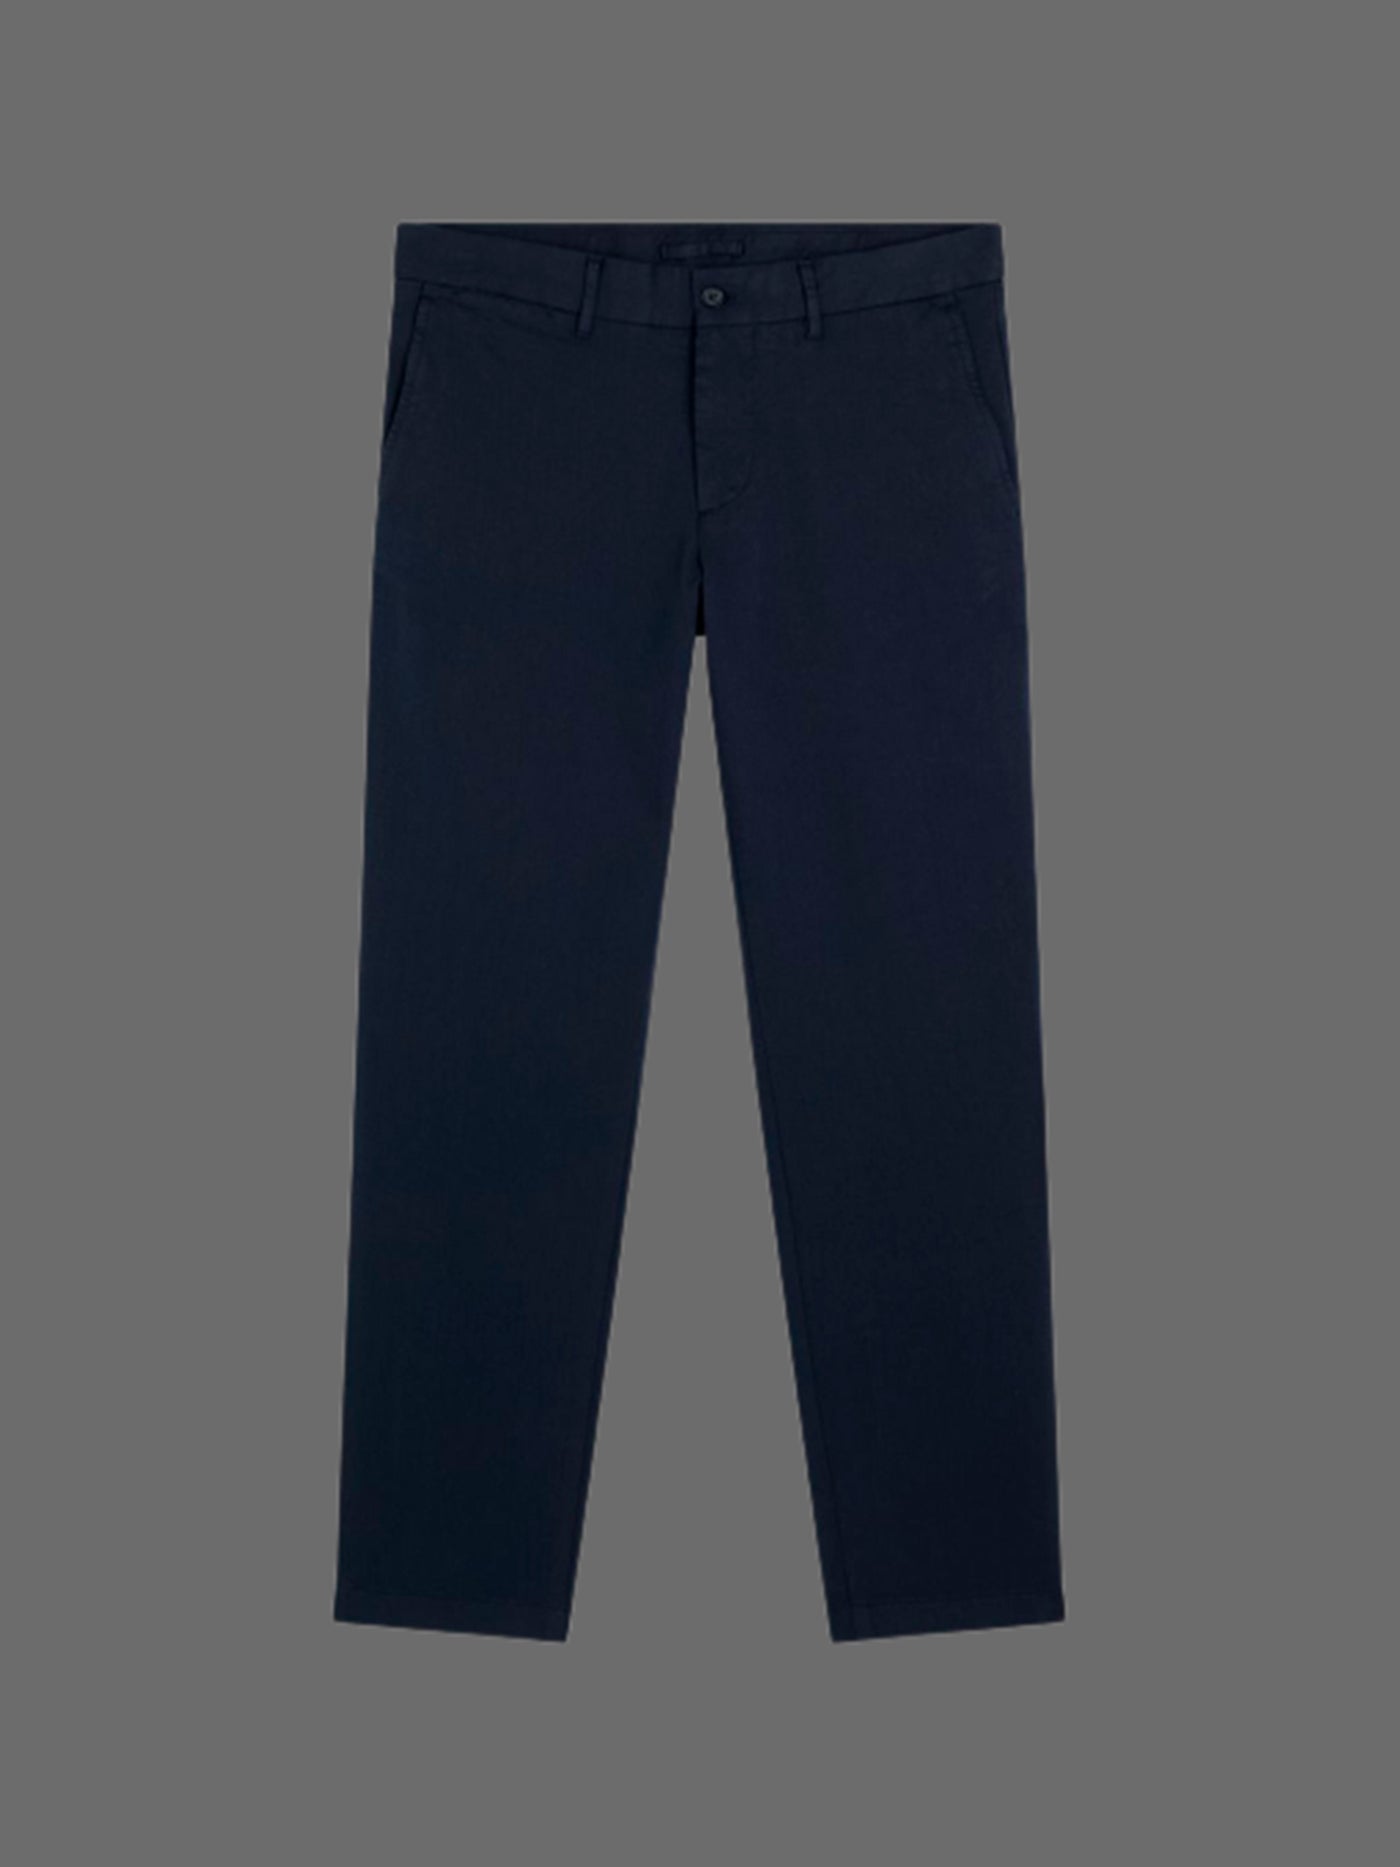 Chaze Flannel Twill Pants - Navy